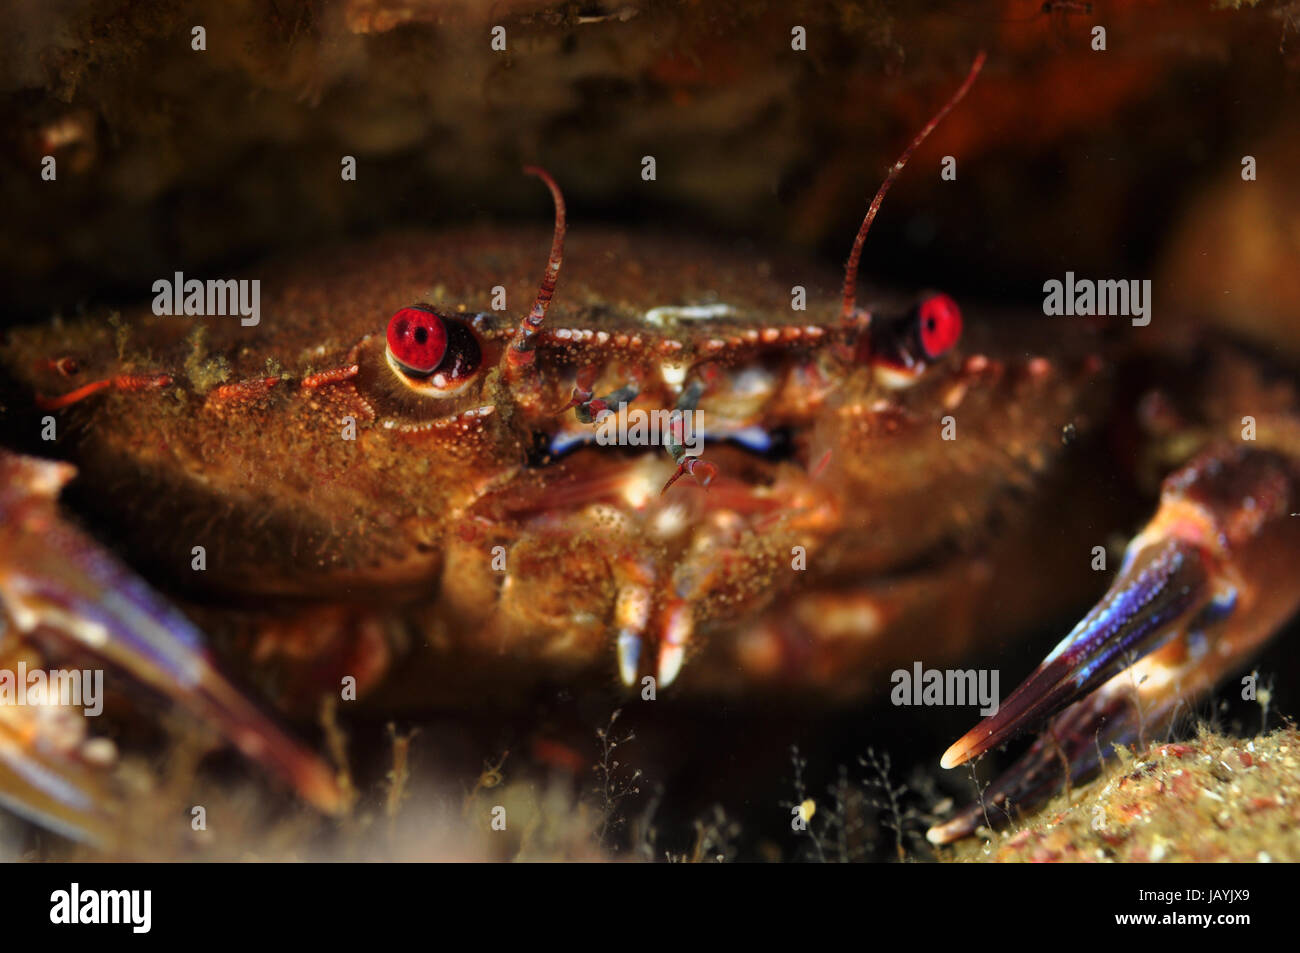 Velvet crab, Necora puber, protected inside a crevice Stock Photo